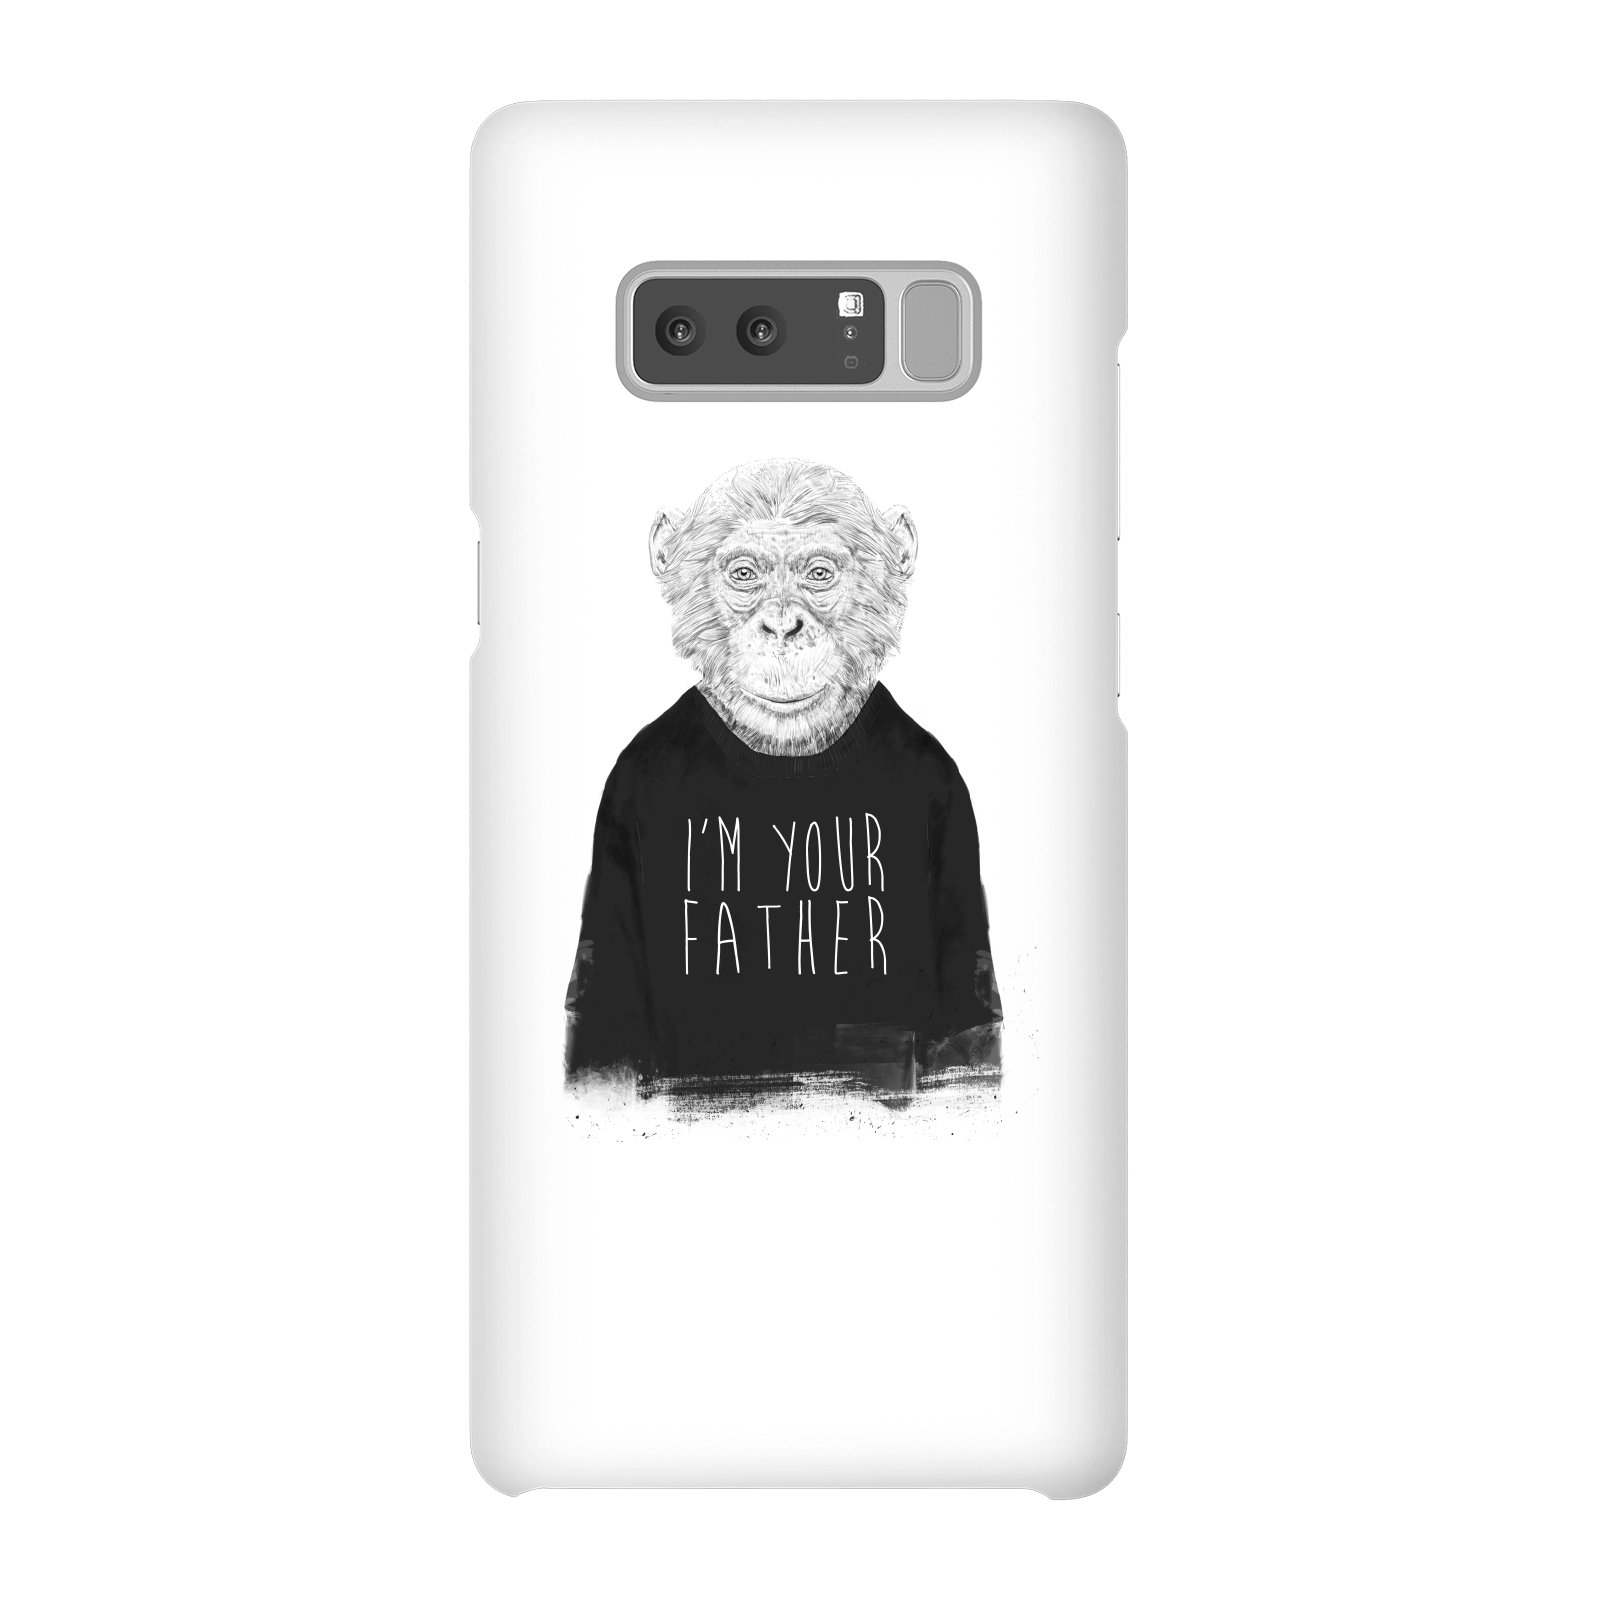 Balazs Solti I'm Your Father Phone Case for iPhone and Android - Samsung Note 8 - Snap Case - Gloss